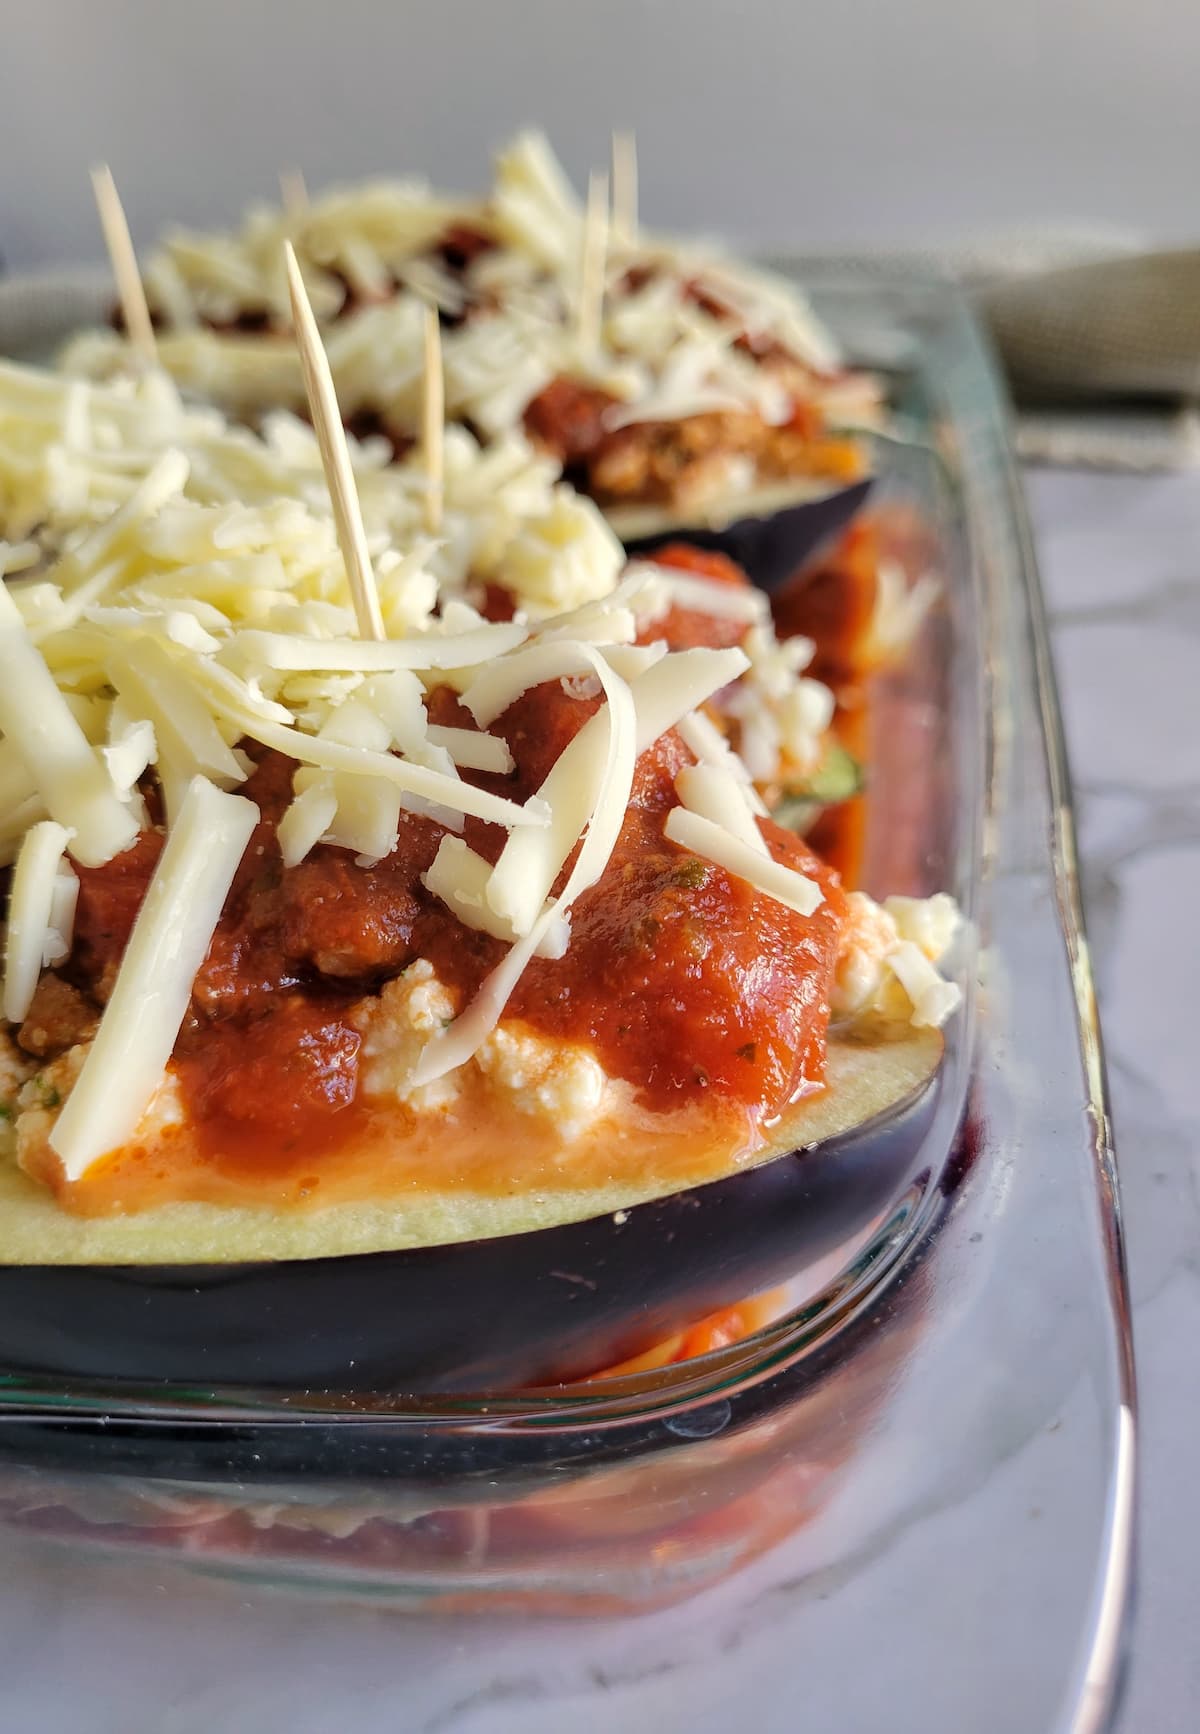 stuffed eggplant with mozzarella cheese in a rectangular baking dish, toothpicks in the eggplant